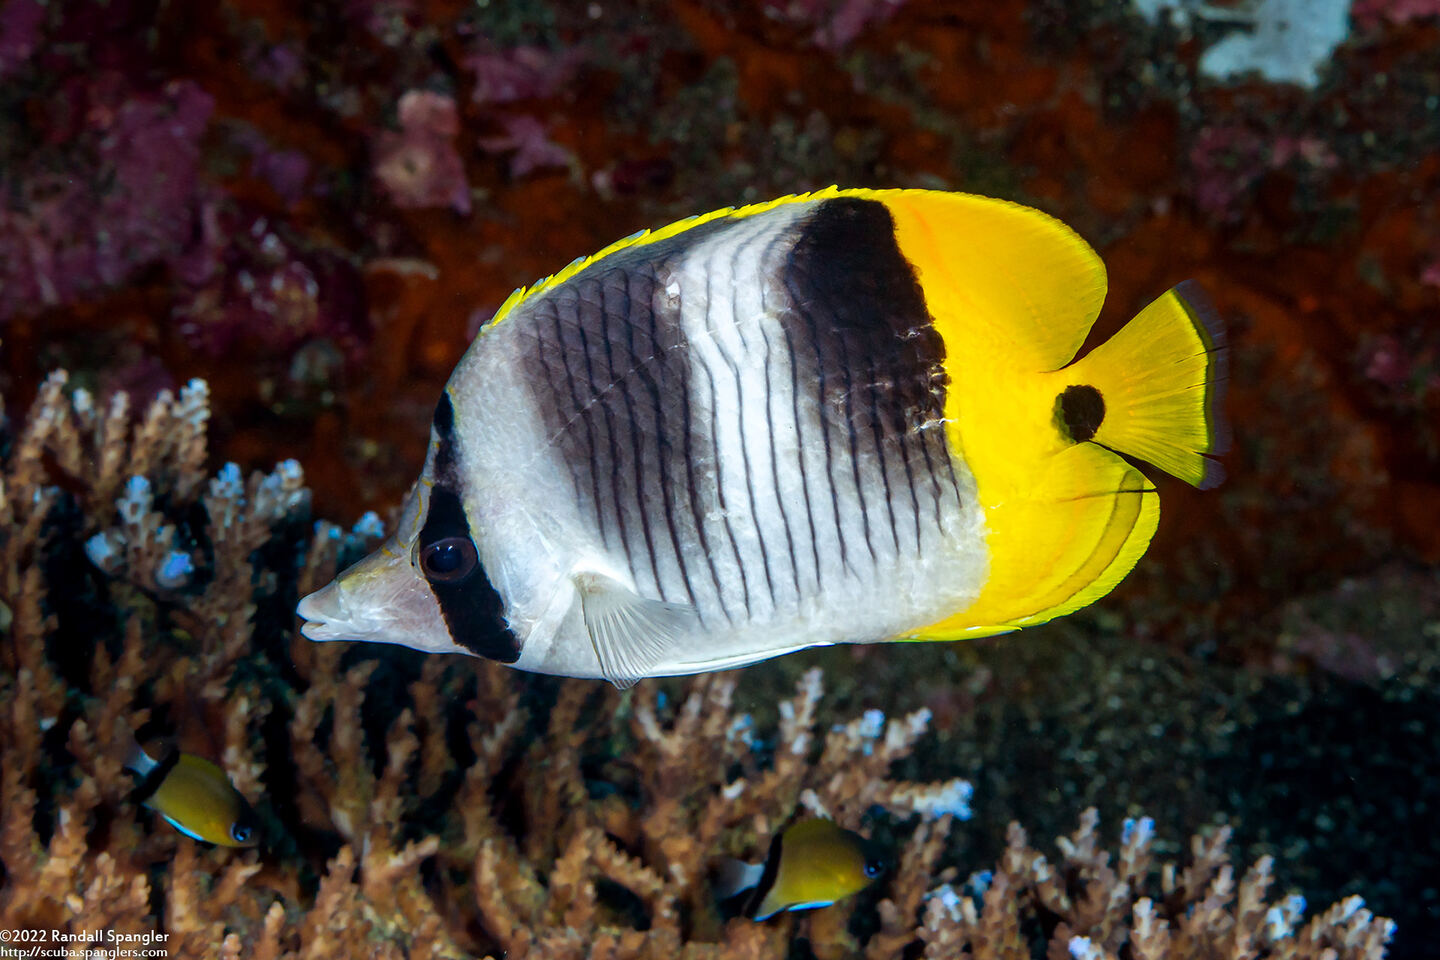 Chaetodon ulietensis (Pacific Double-Saddle Butterflyfish)